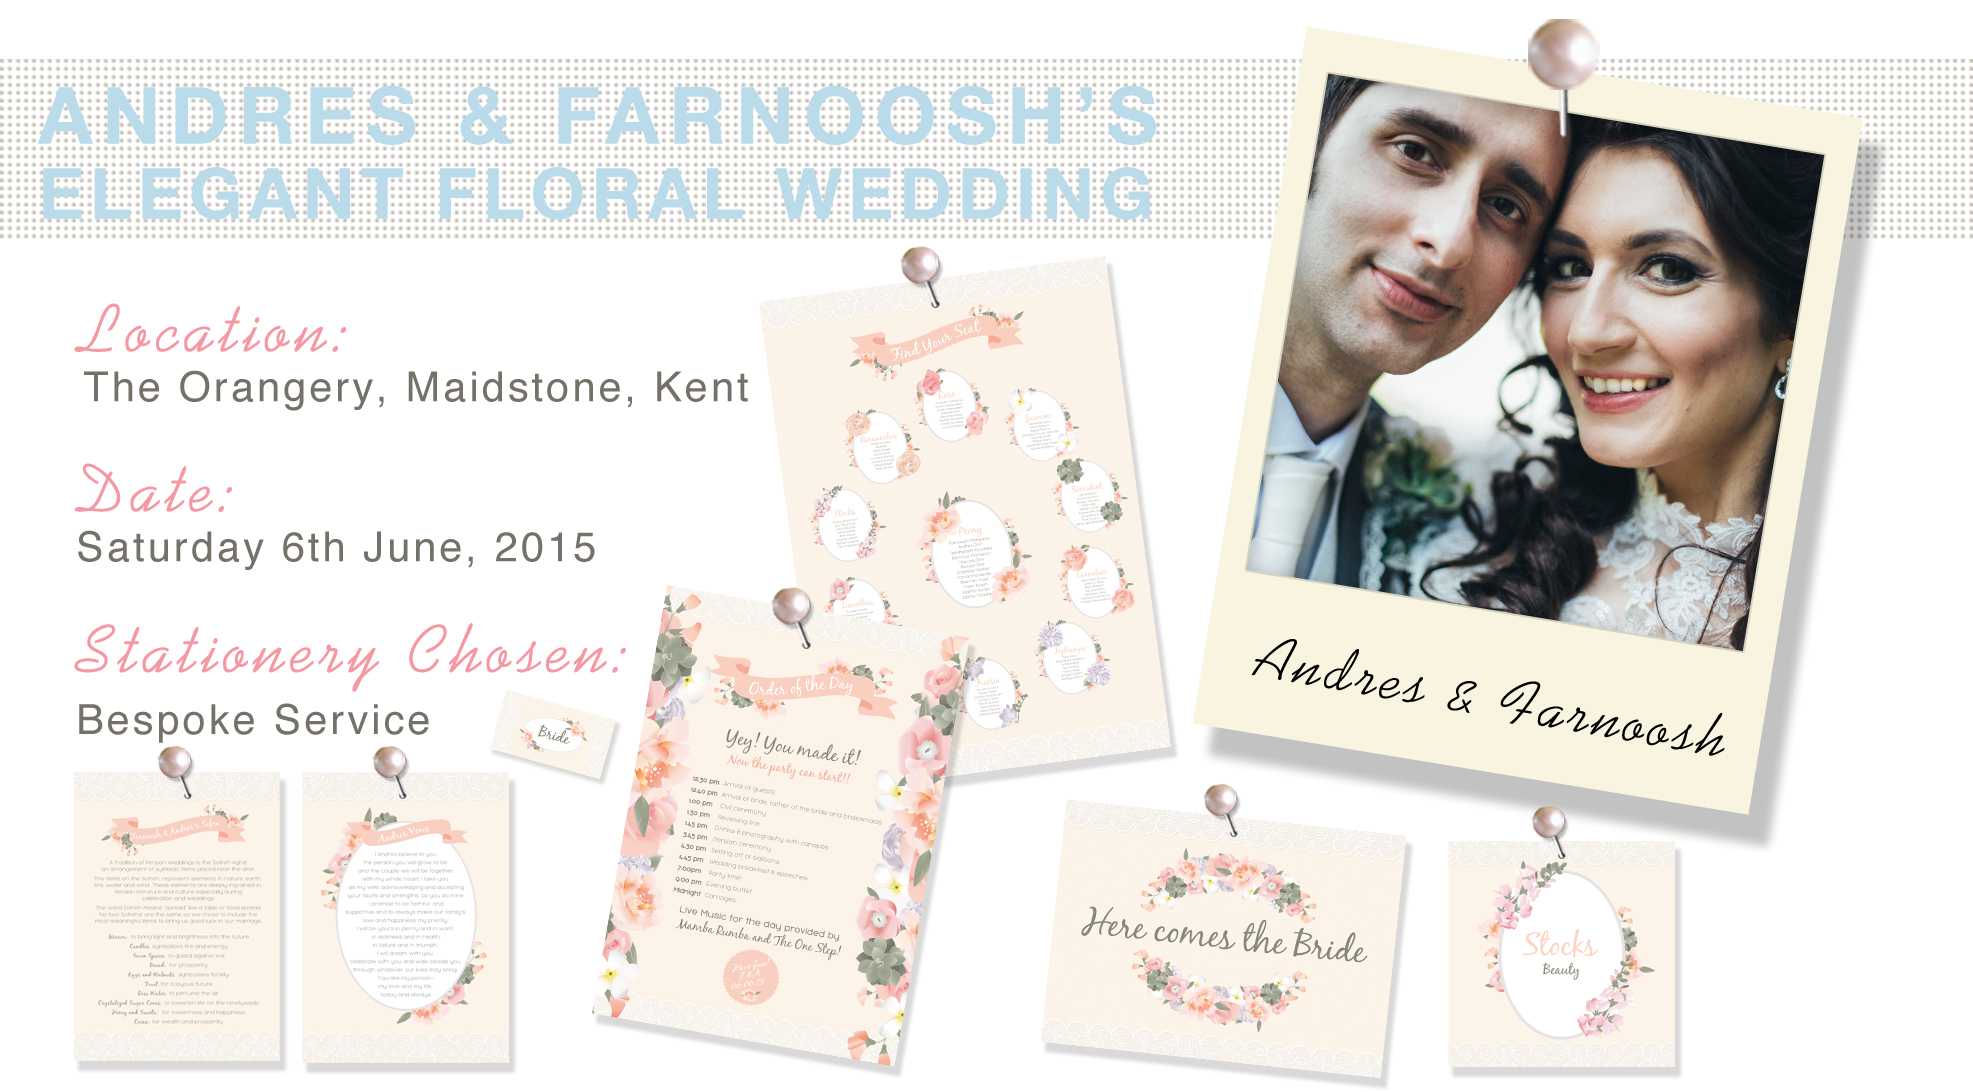 Andres and Farnoosh's Kent Wedding